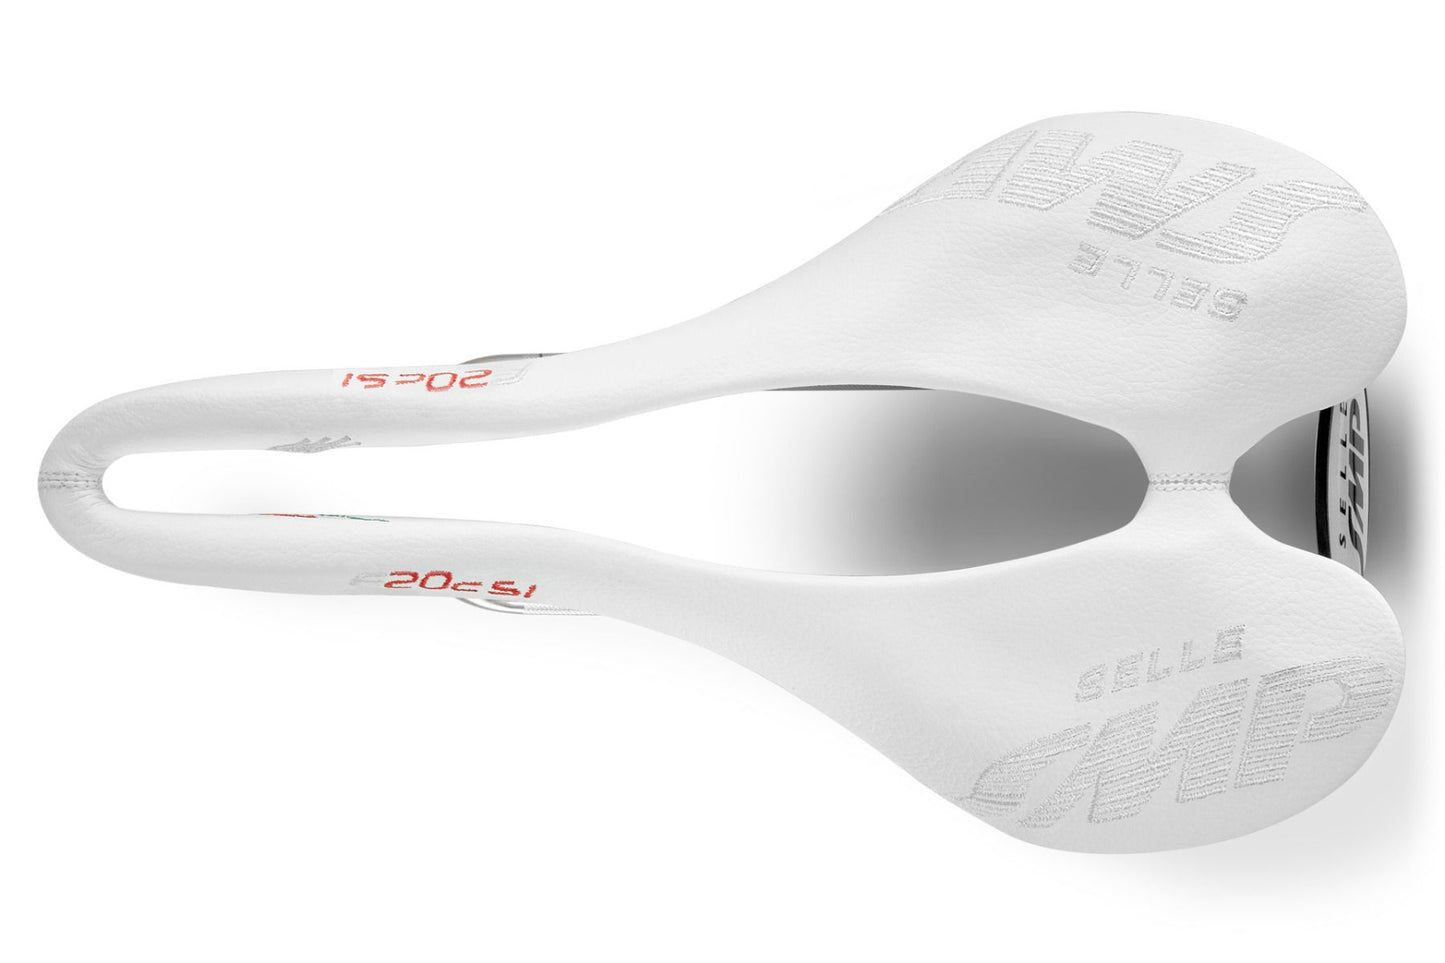 Selle SMP F20C s.i. Bicycle Saddle with Steel Rails (White)